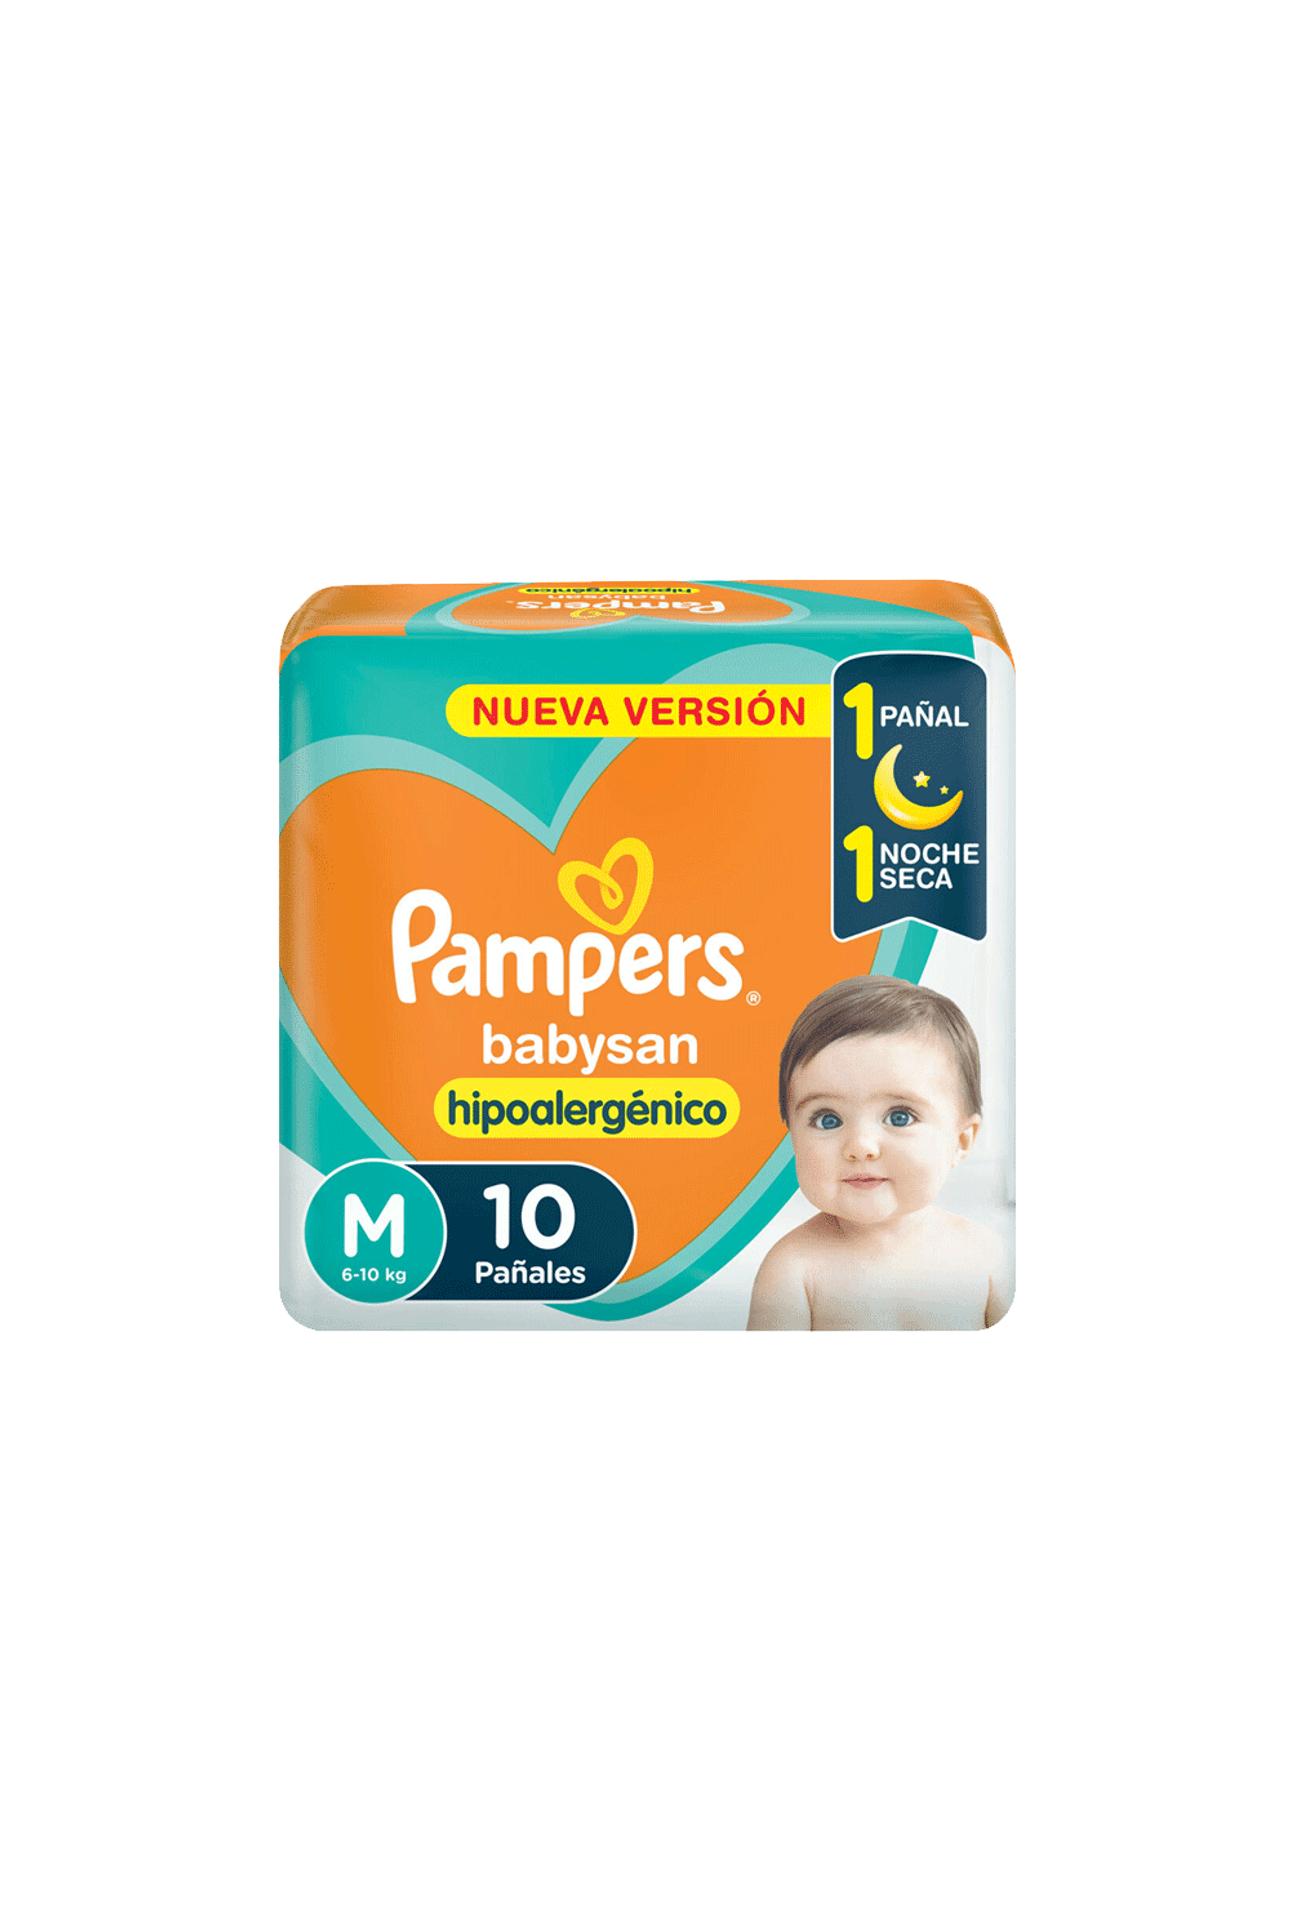 Pampers-Pañal-Pampers-Babysan-Talle-M-x-10-Unid-7500435228626_img1